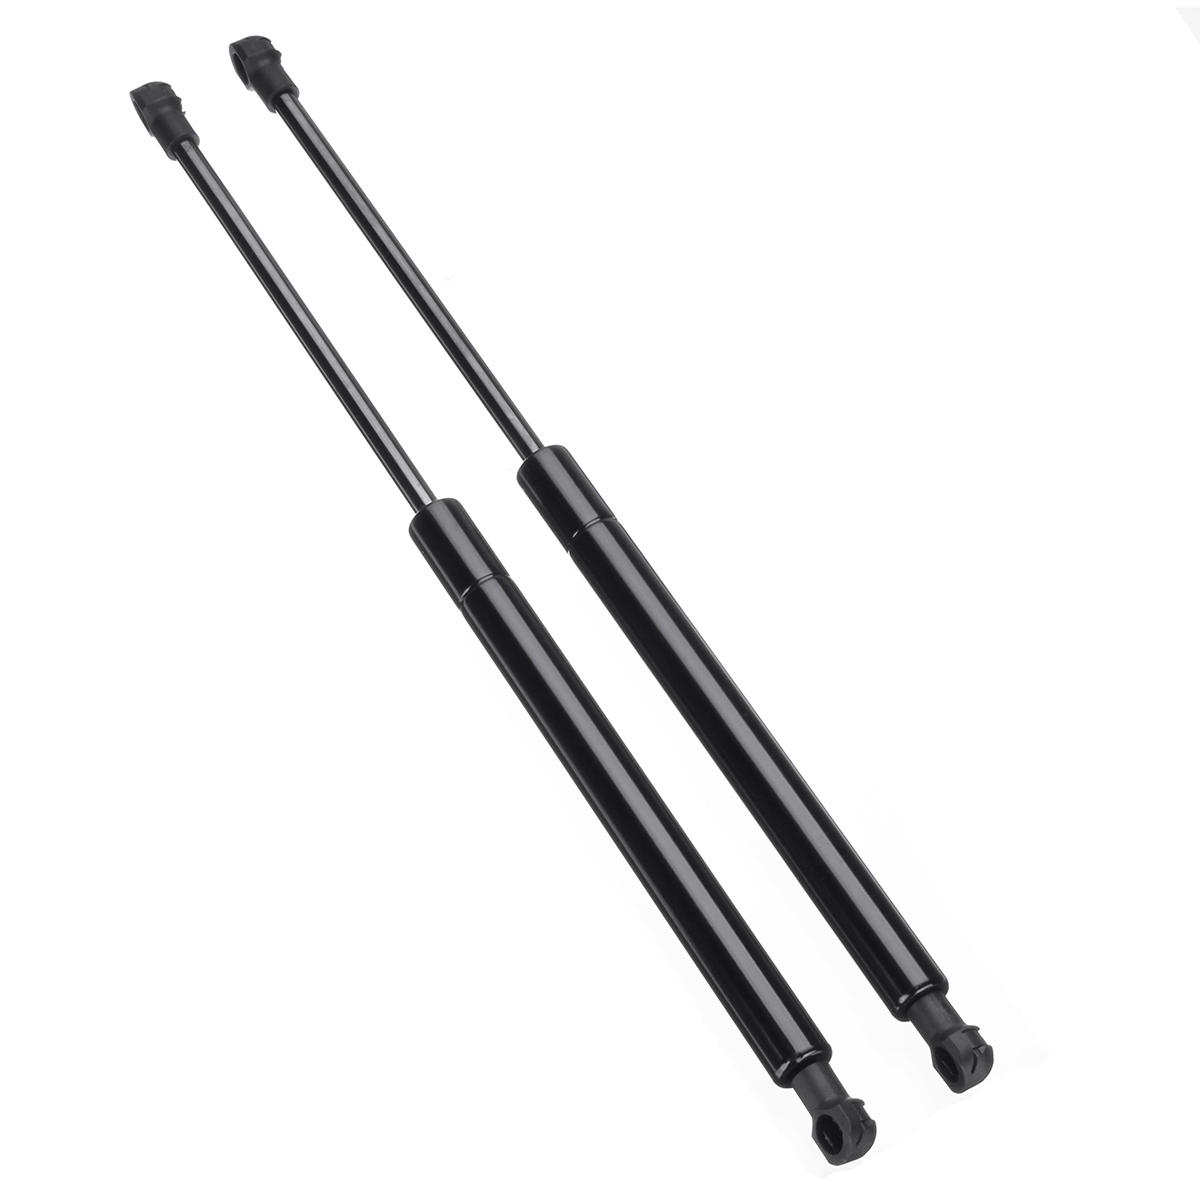 

2pcs Front Bonnet Hood Support Rod Gas Struts For Land Rover Discovery Range Rover Sport